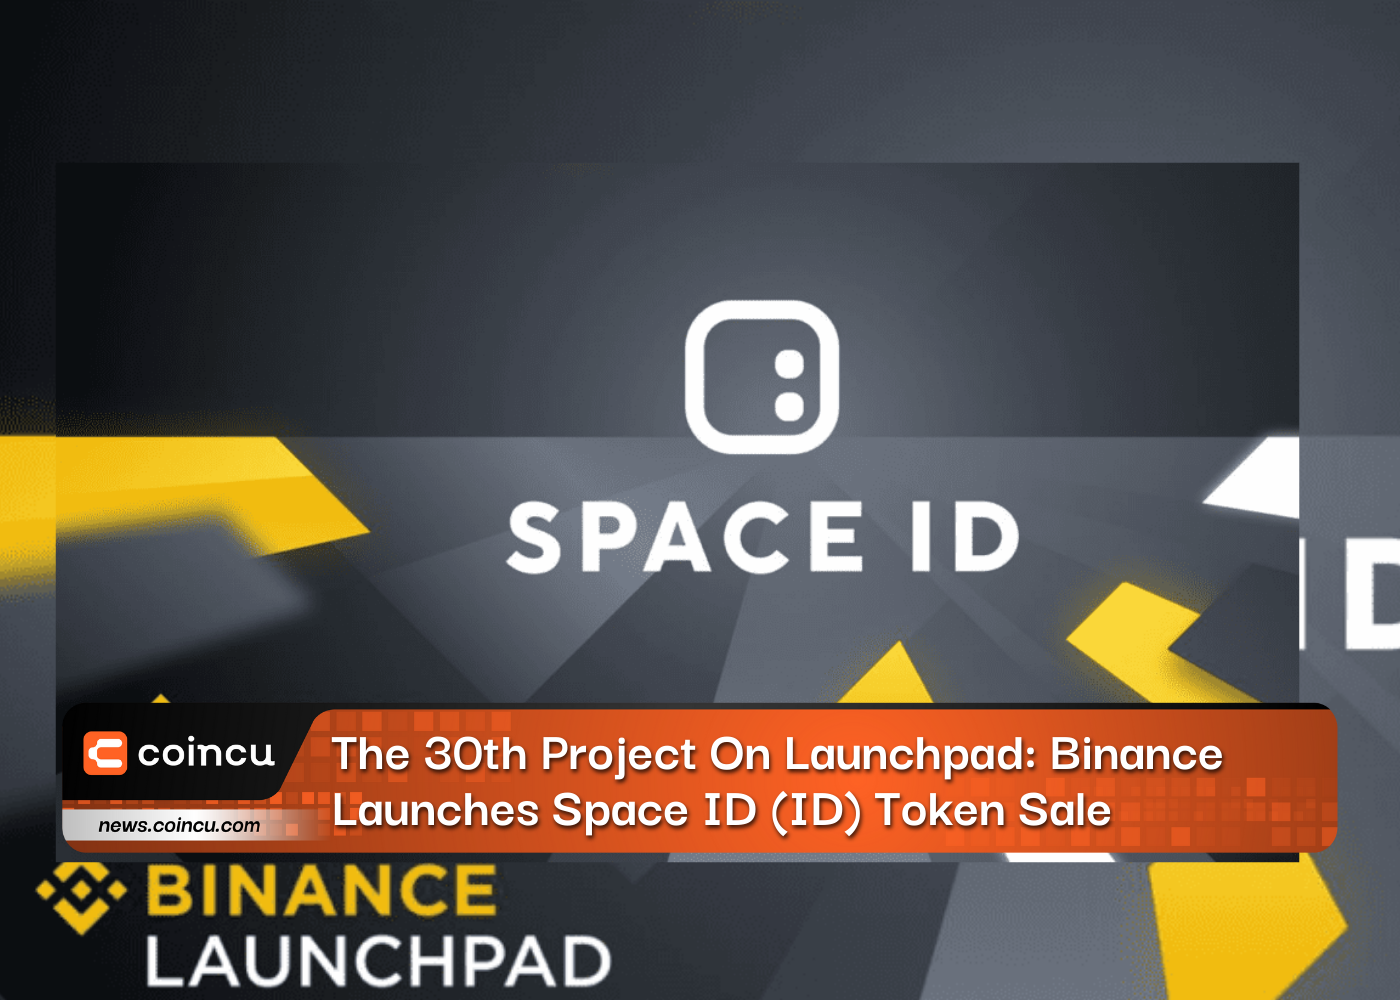 The 30th Project On Launchpad: Binance Launches Space ID (ID) Token Sale